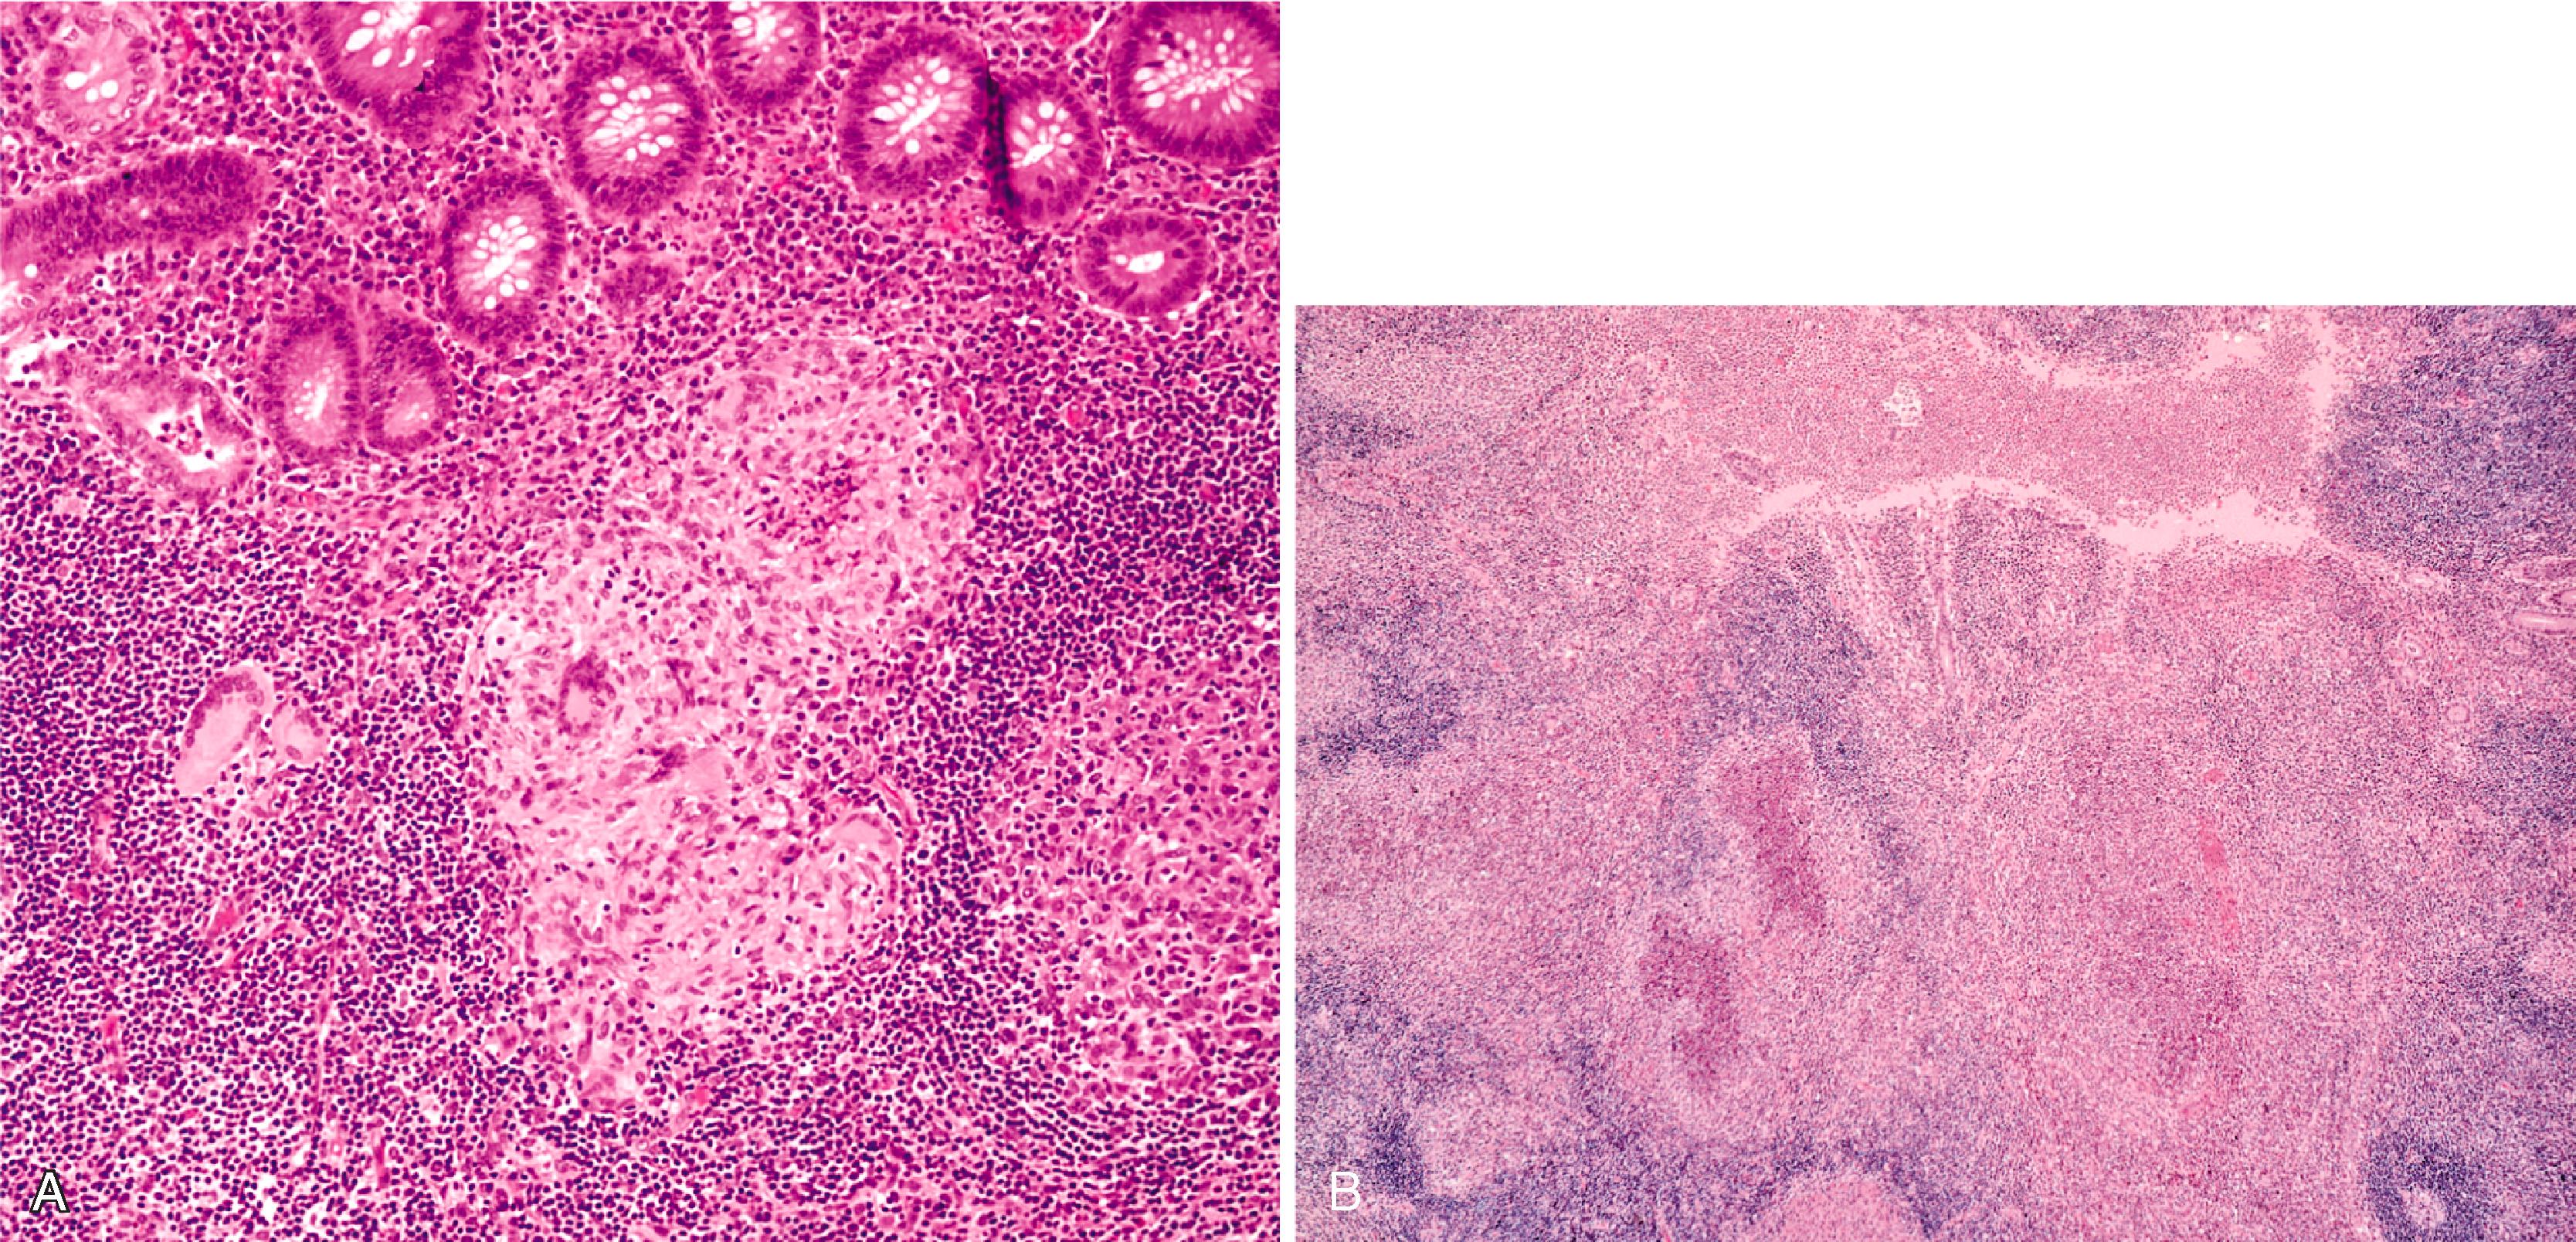 FIGURE 4.18, A, Epithelioid granulomas with prominent lymphoid cuffs are typical of Yersinia enterocolitica infection. B, Lymphoid hyperplasia with necrotizing granulomatous inflammation and prominent microabscess formation in a case of appendicitis caused by Yersinia pseudotuberculosis .